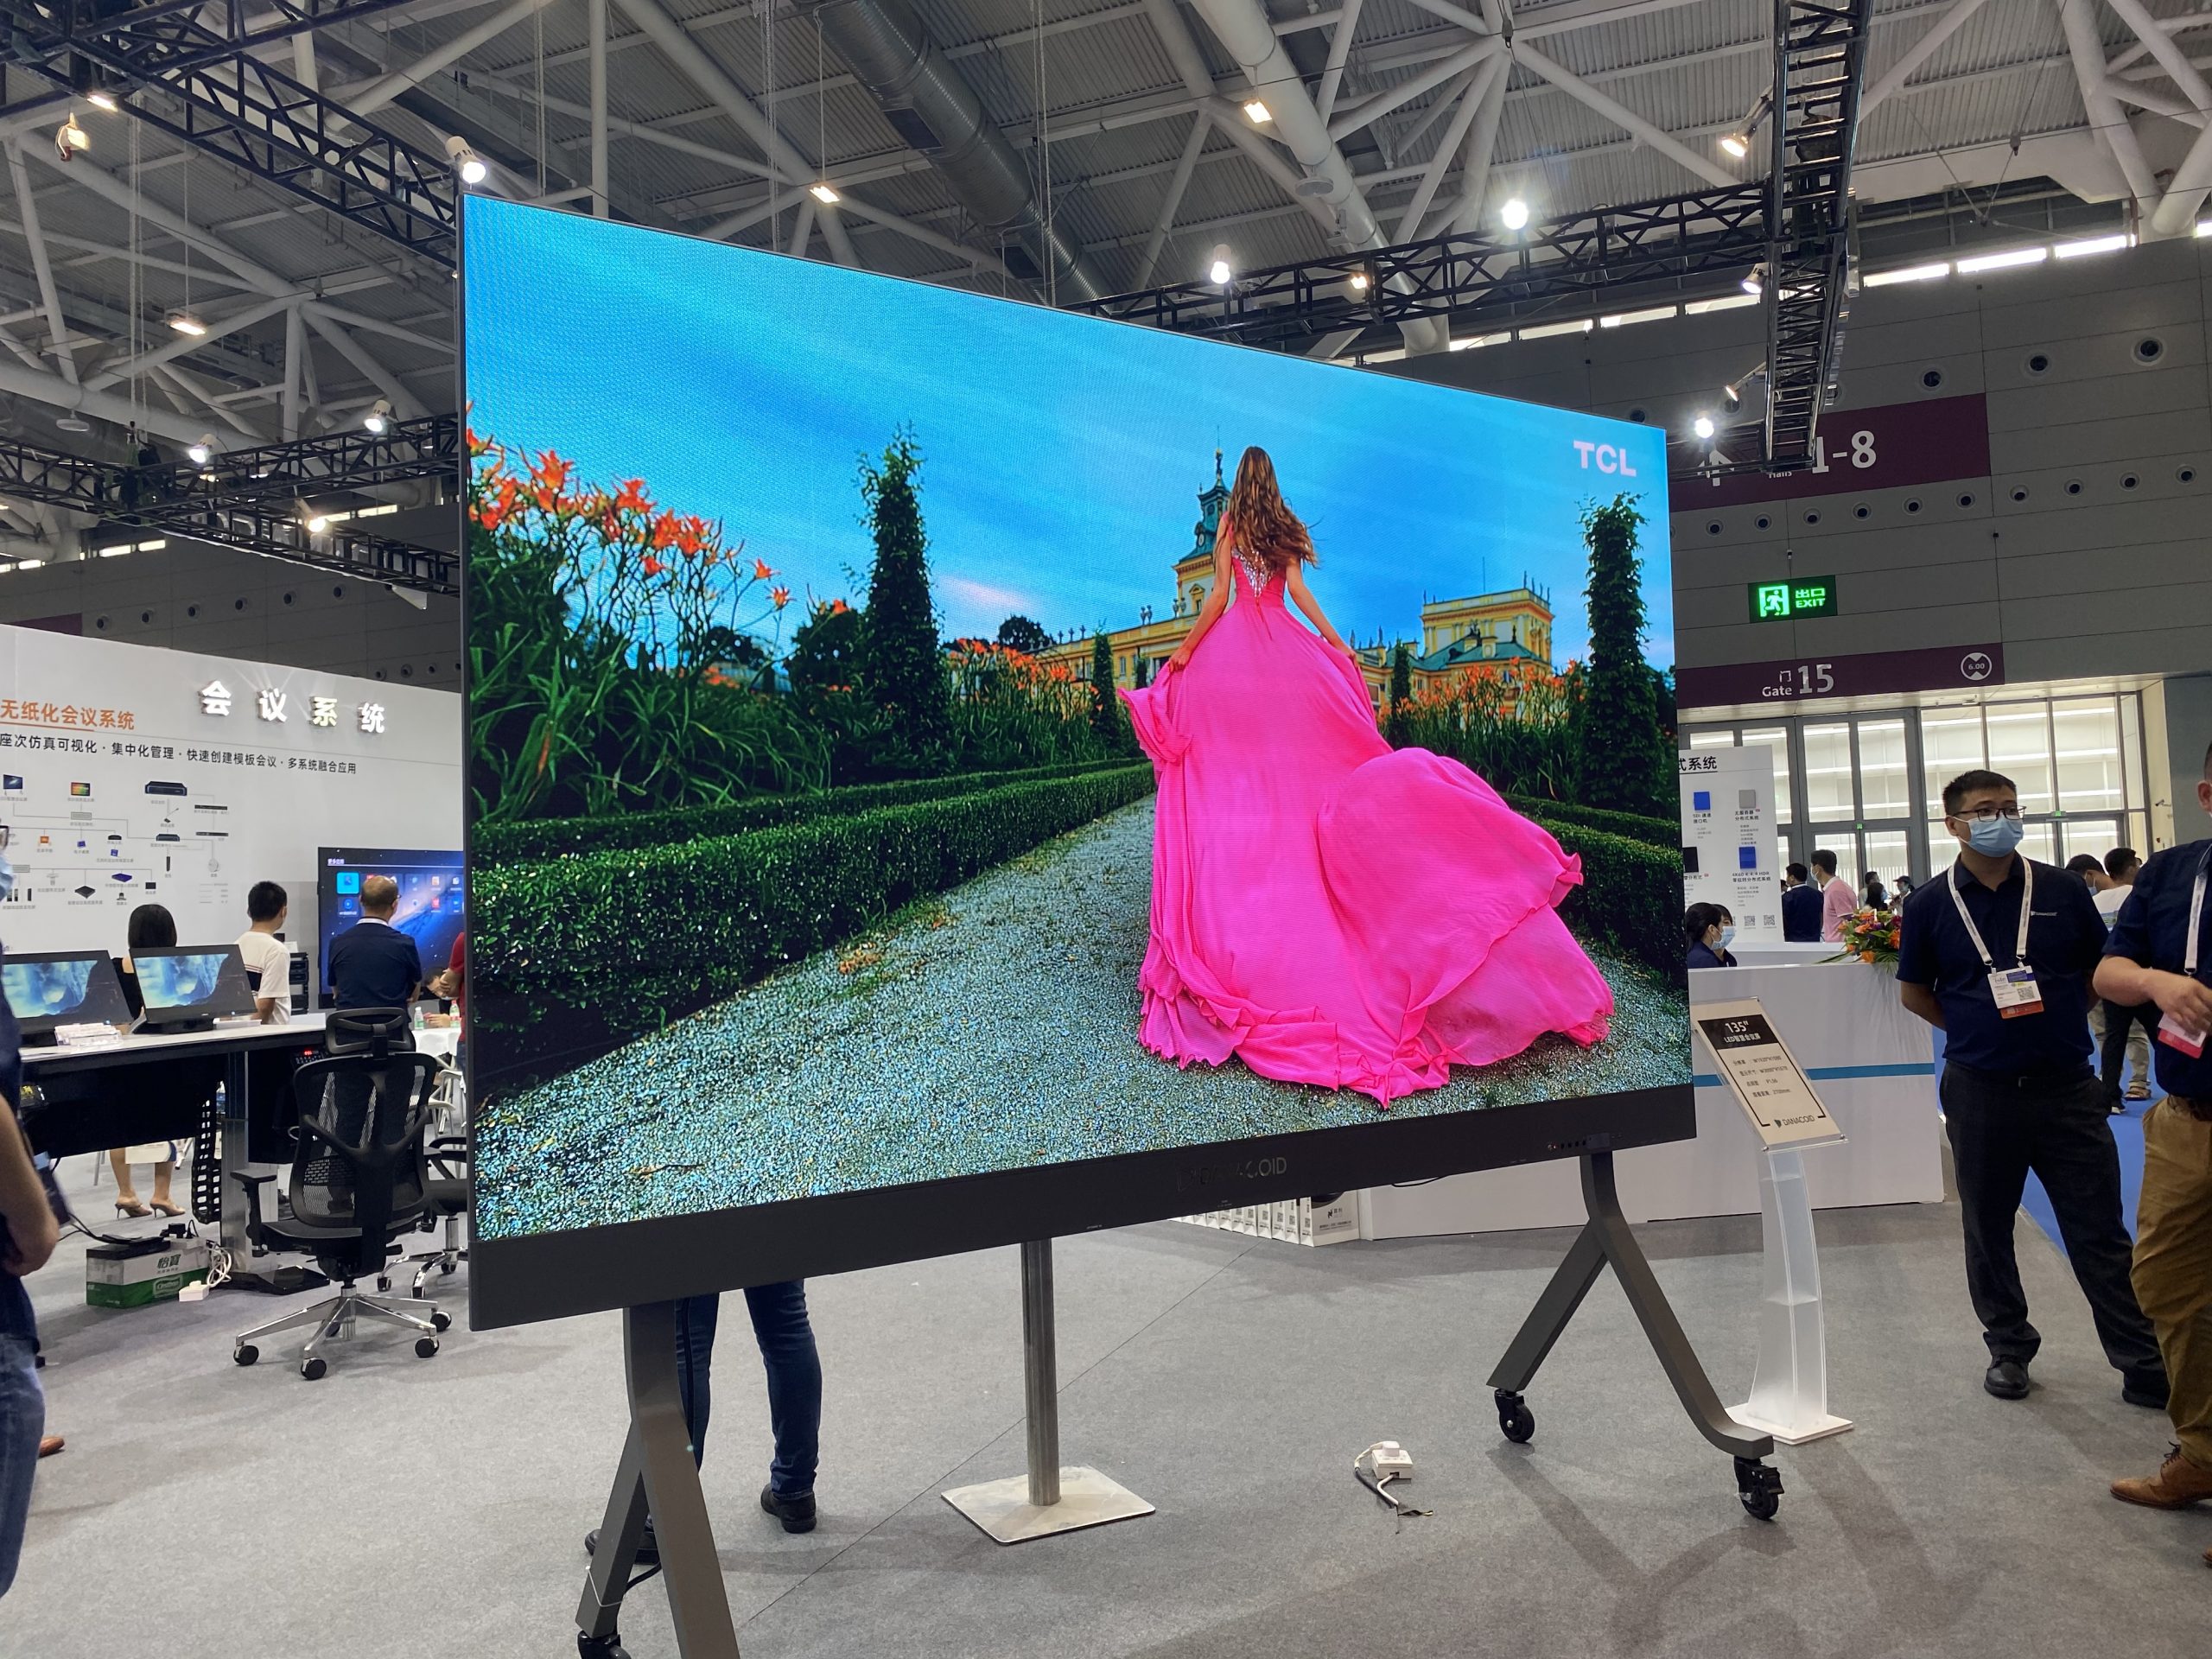 Where should the LED display industry go in the face of price wars